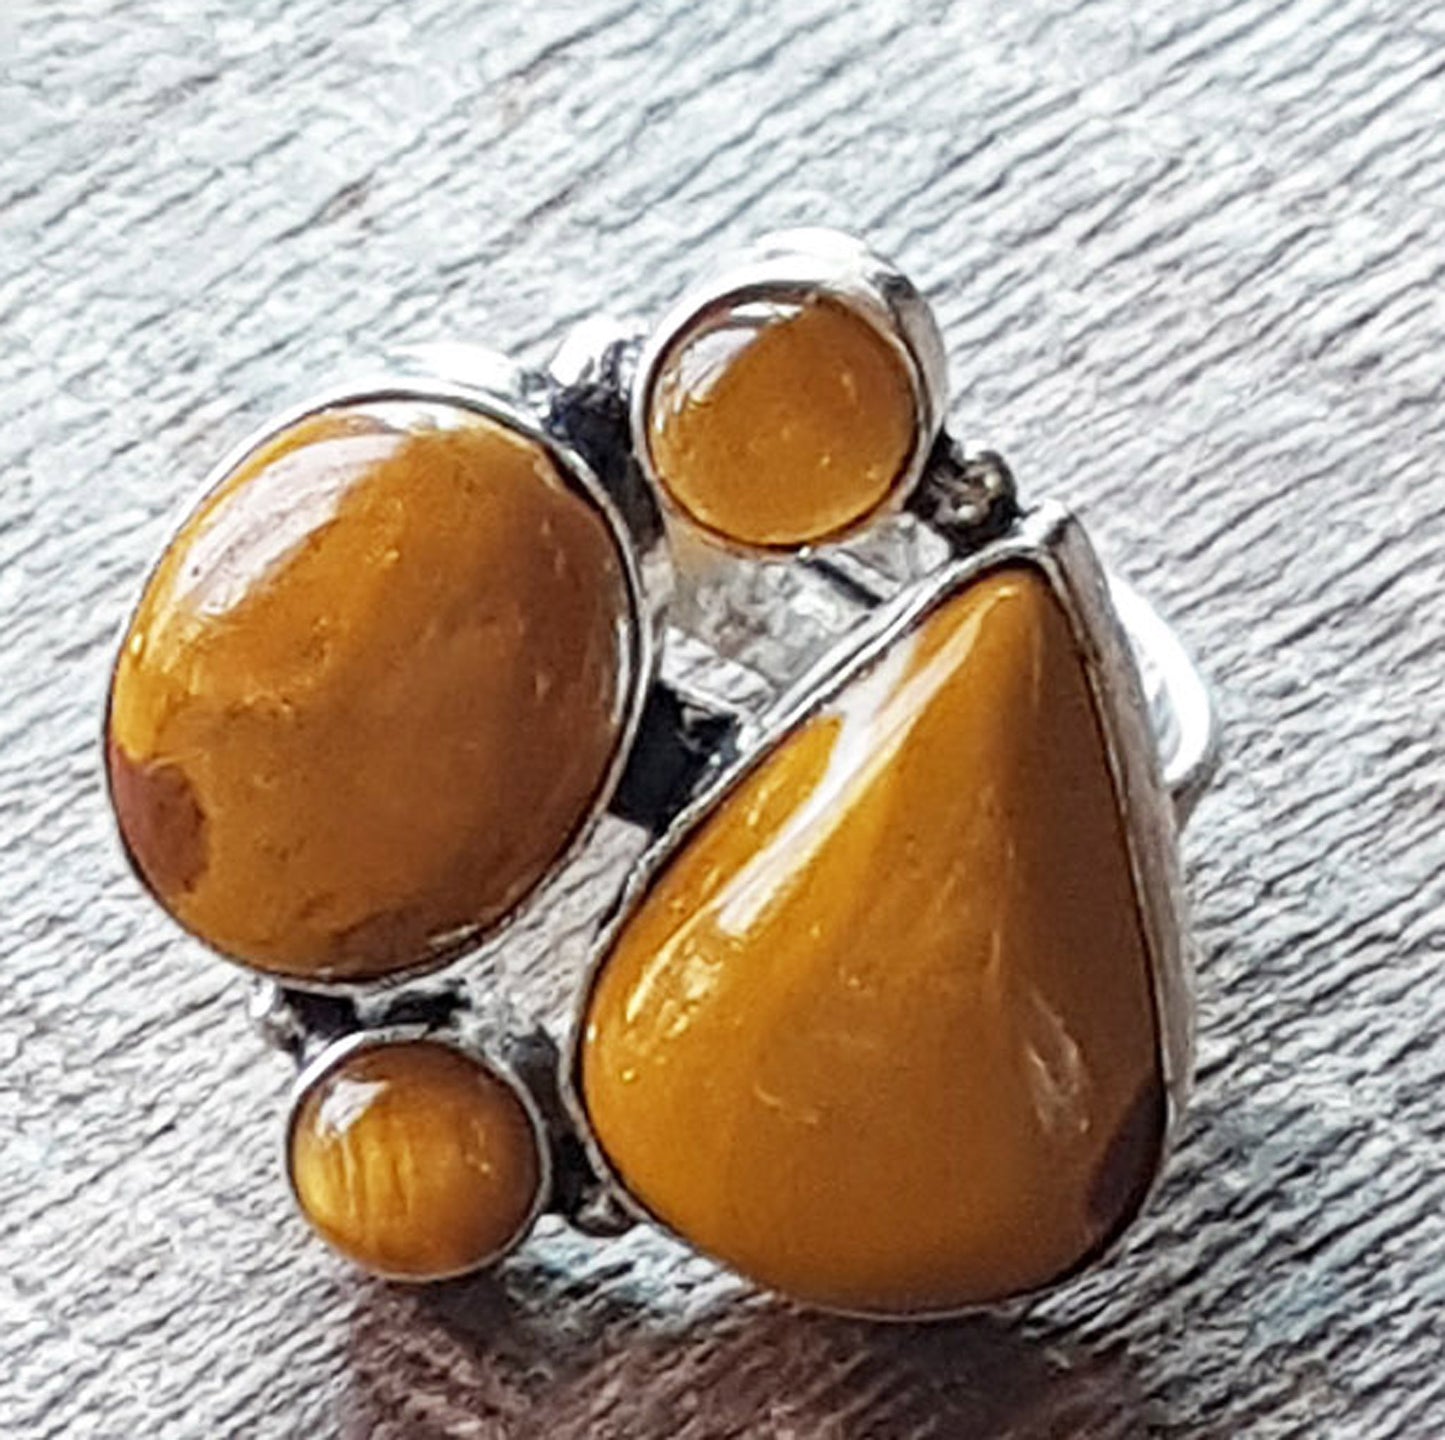 Gemstone Cluster Art Rings adjustable size. One of a kind rings with semi precious stones in asymetrical settings. Comfortable to wear.